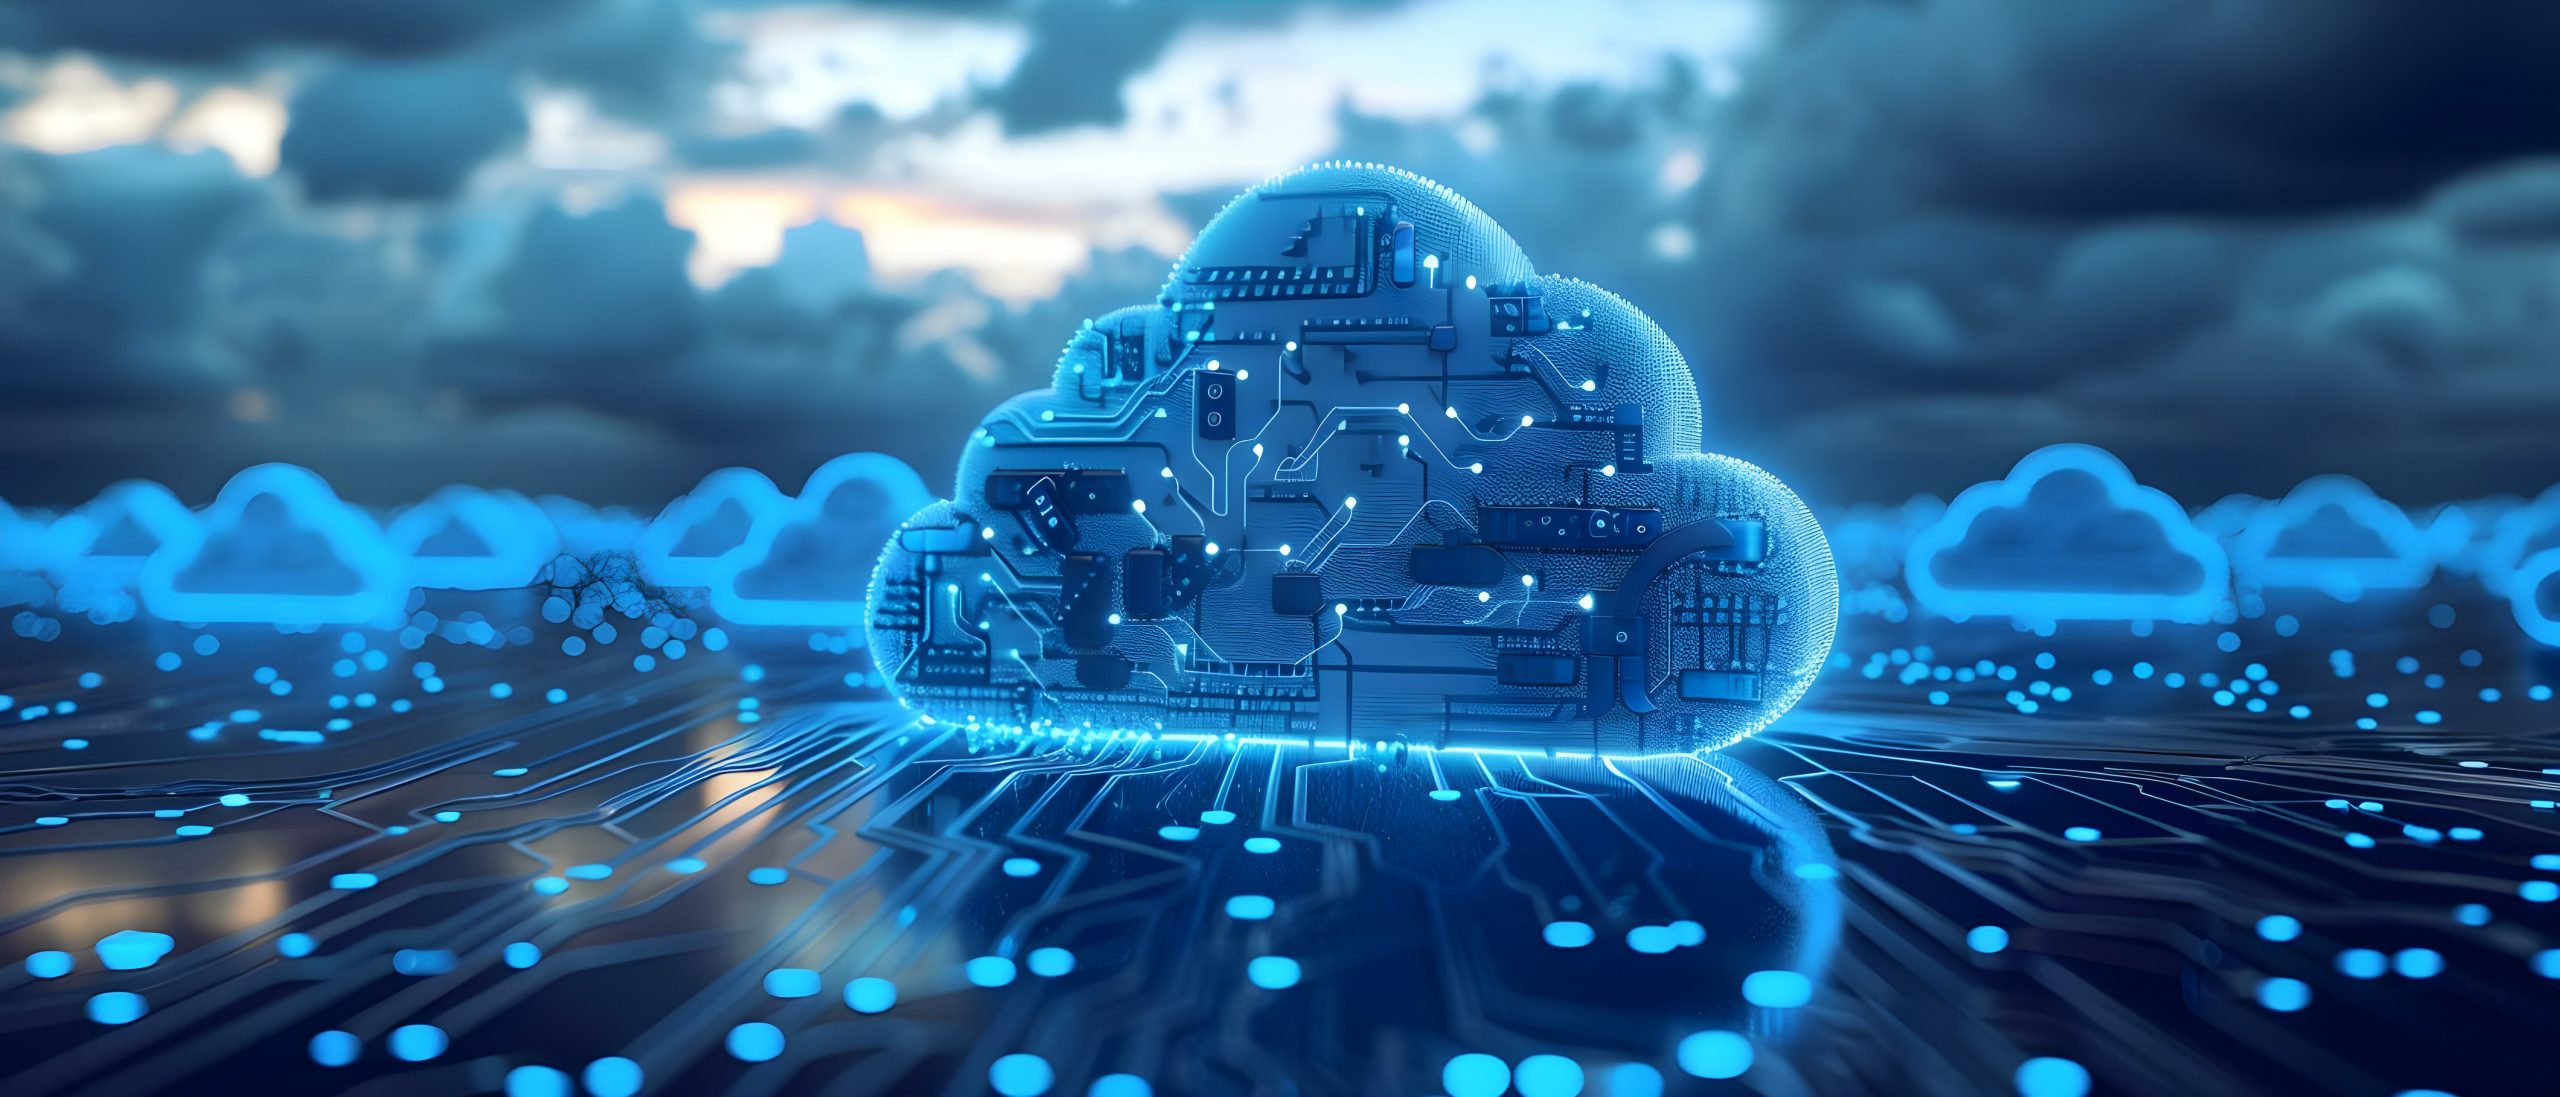 Digital concept of cloud computing with circuit board pattern forming a cloud shape over a networked background, symbolizing Azure cloud migration and modernization.